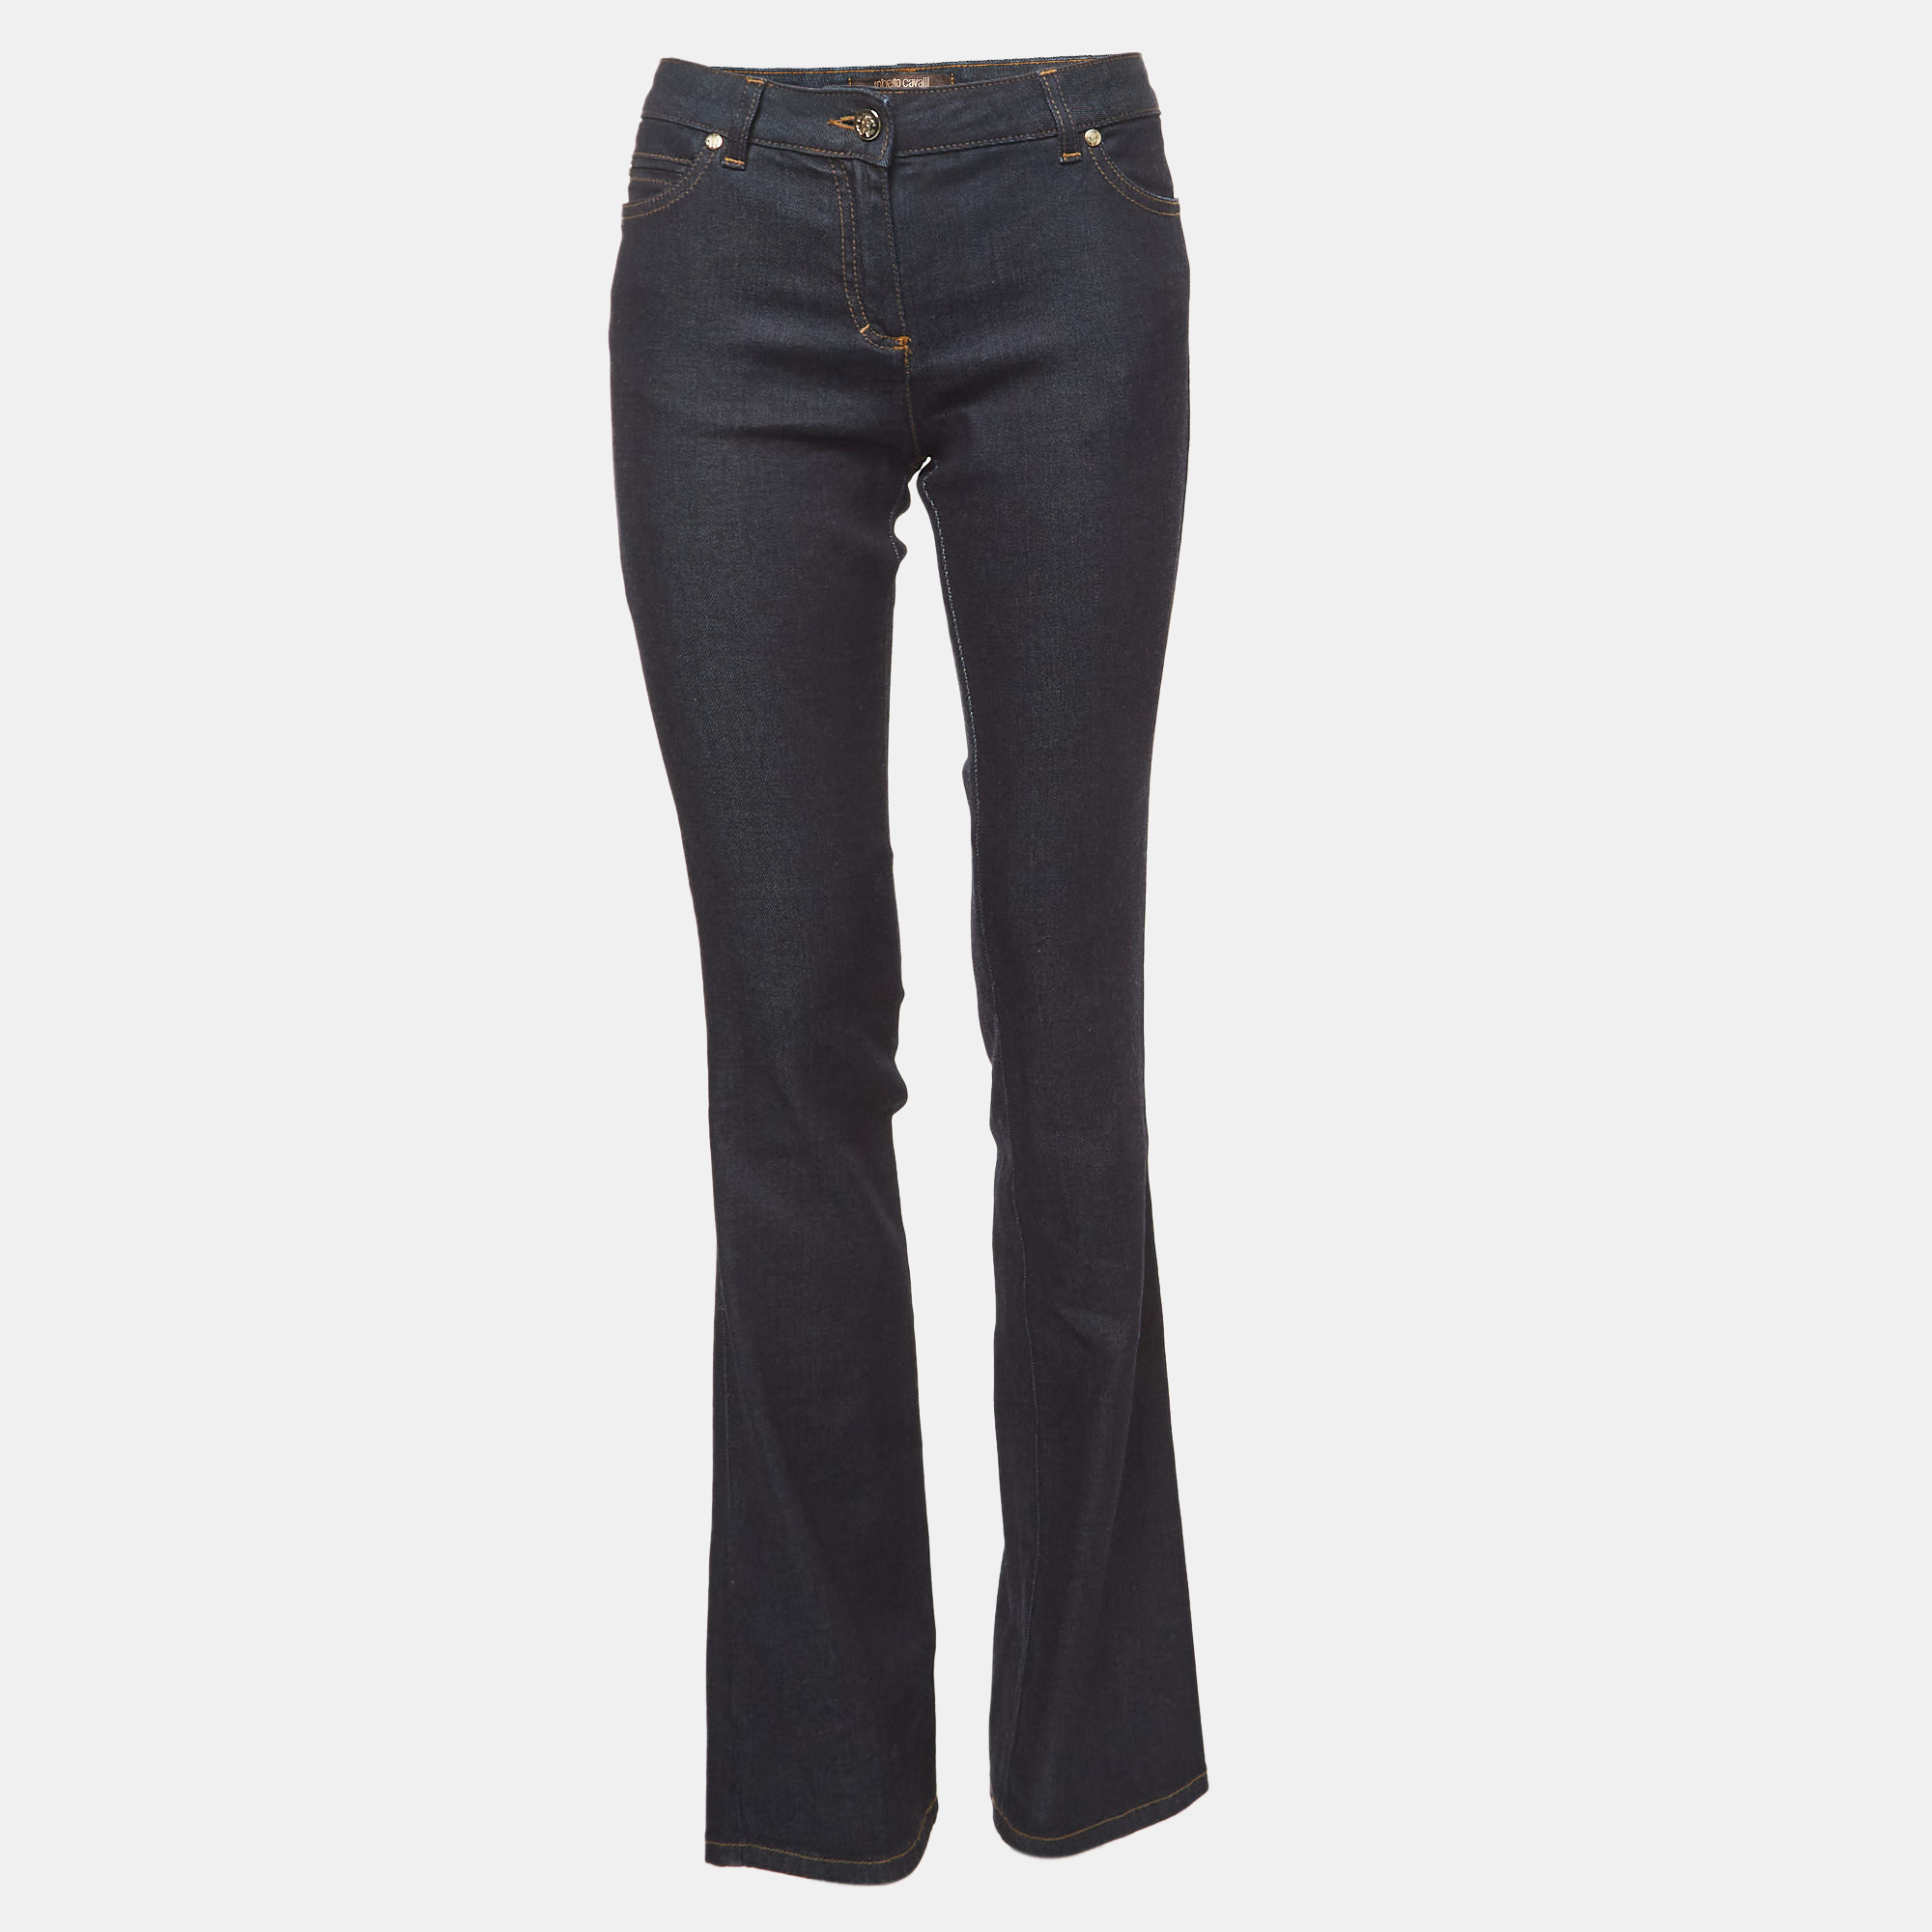 A good pair of jeans always makes the closet complete. This pair of jeans is tailored with such skill and style that it will be your favorite in no time. It will give you a comfortable stylish fit.